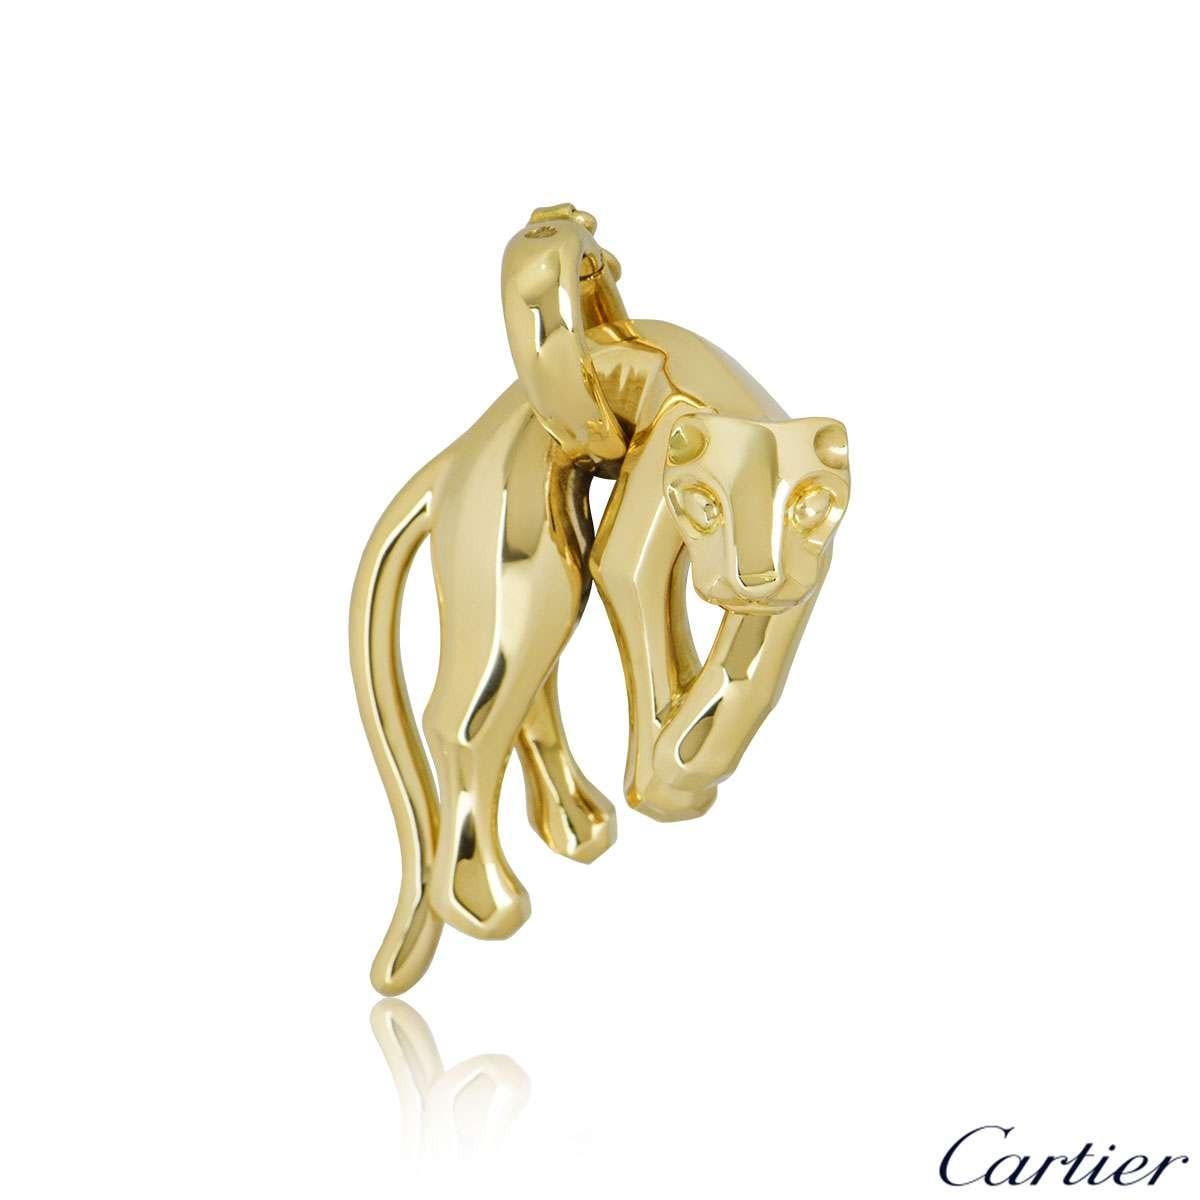 A stunning 18k yellow gold pendant by Cartier from the Panthere De Cartier collection. The pendant comprises of a polished yellow gold panther motif hanging from the waist on a loop bail. The motif measures 4cm in height and 2.5cm in width and has a